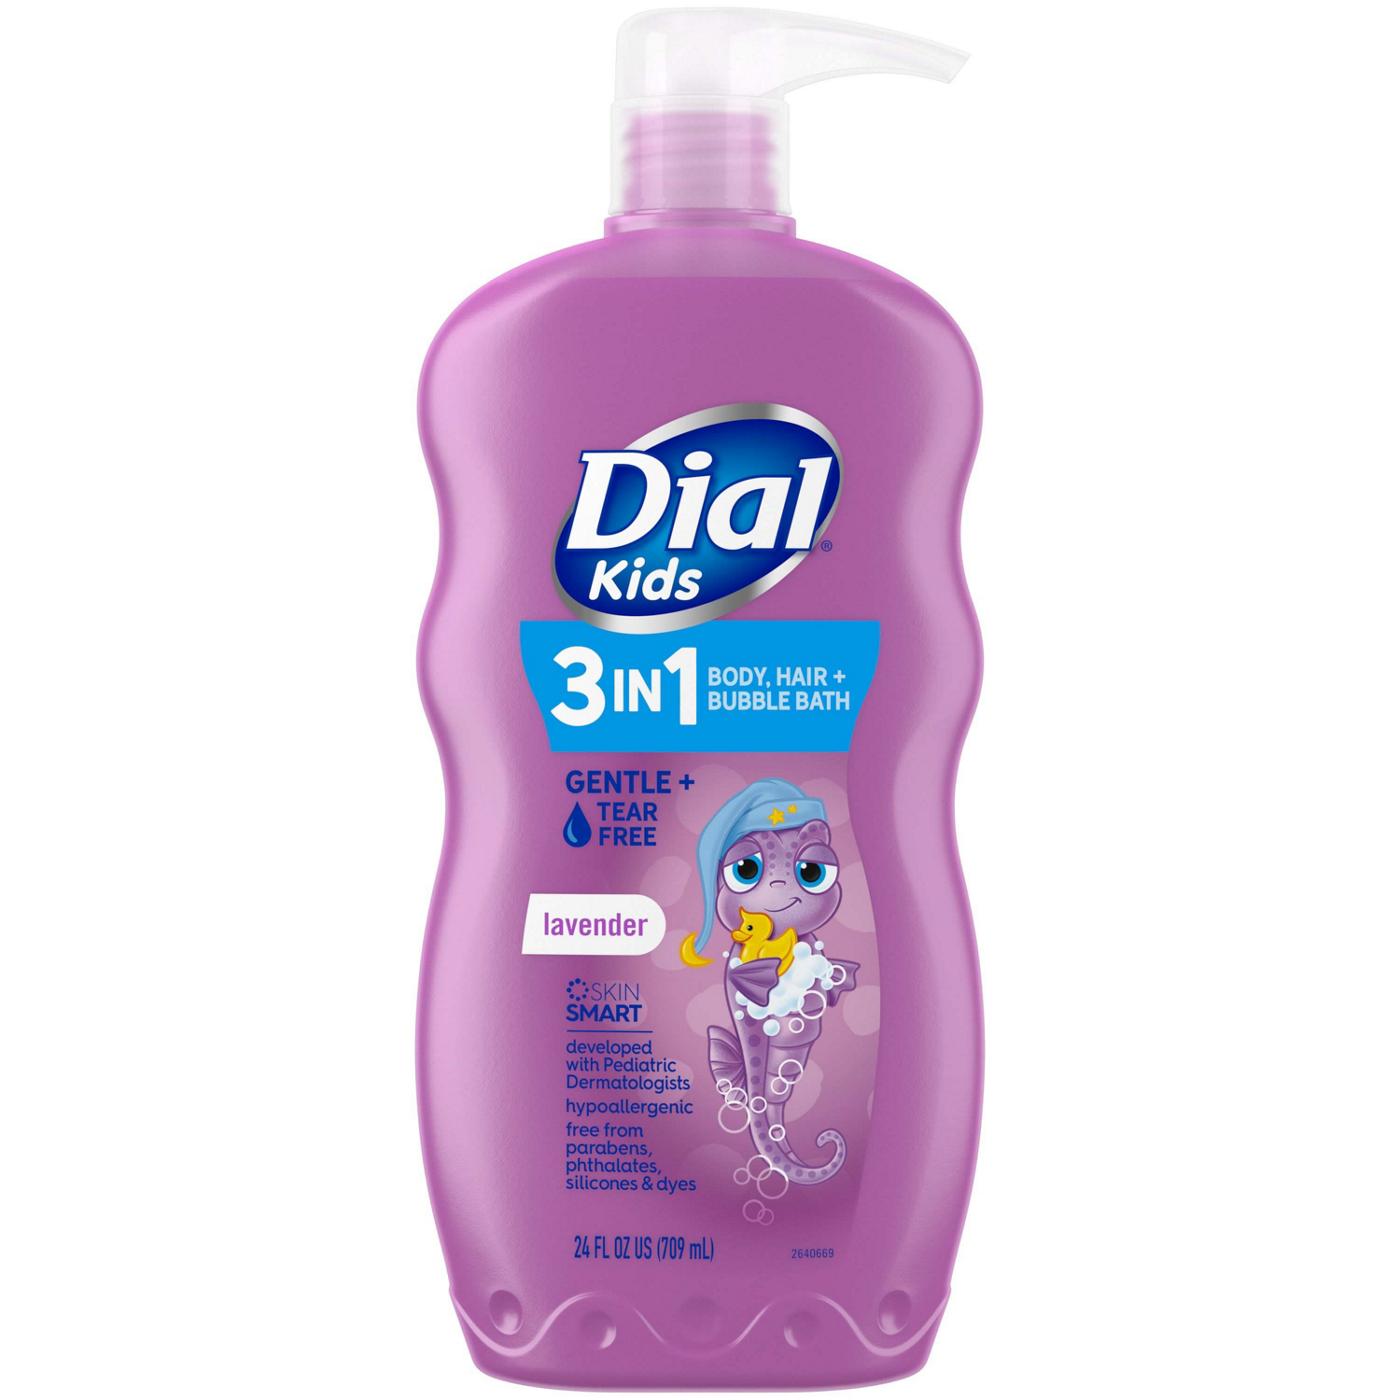 Dial Kids 3-in-1 Body + Hair + Bubble Bath - Lavender; image 1 of 8